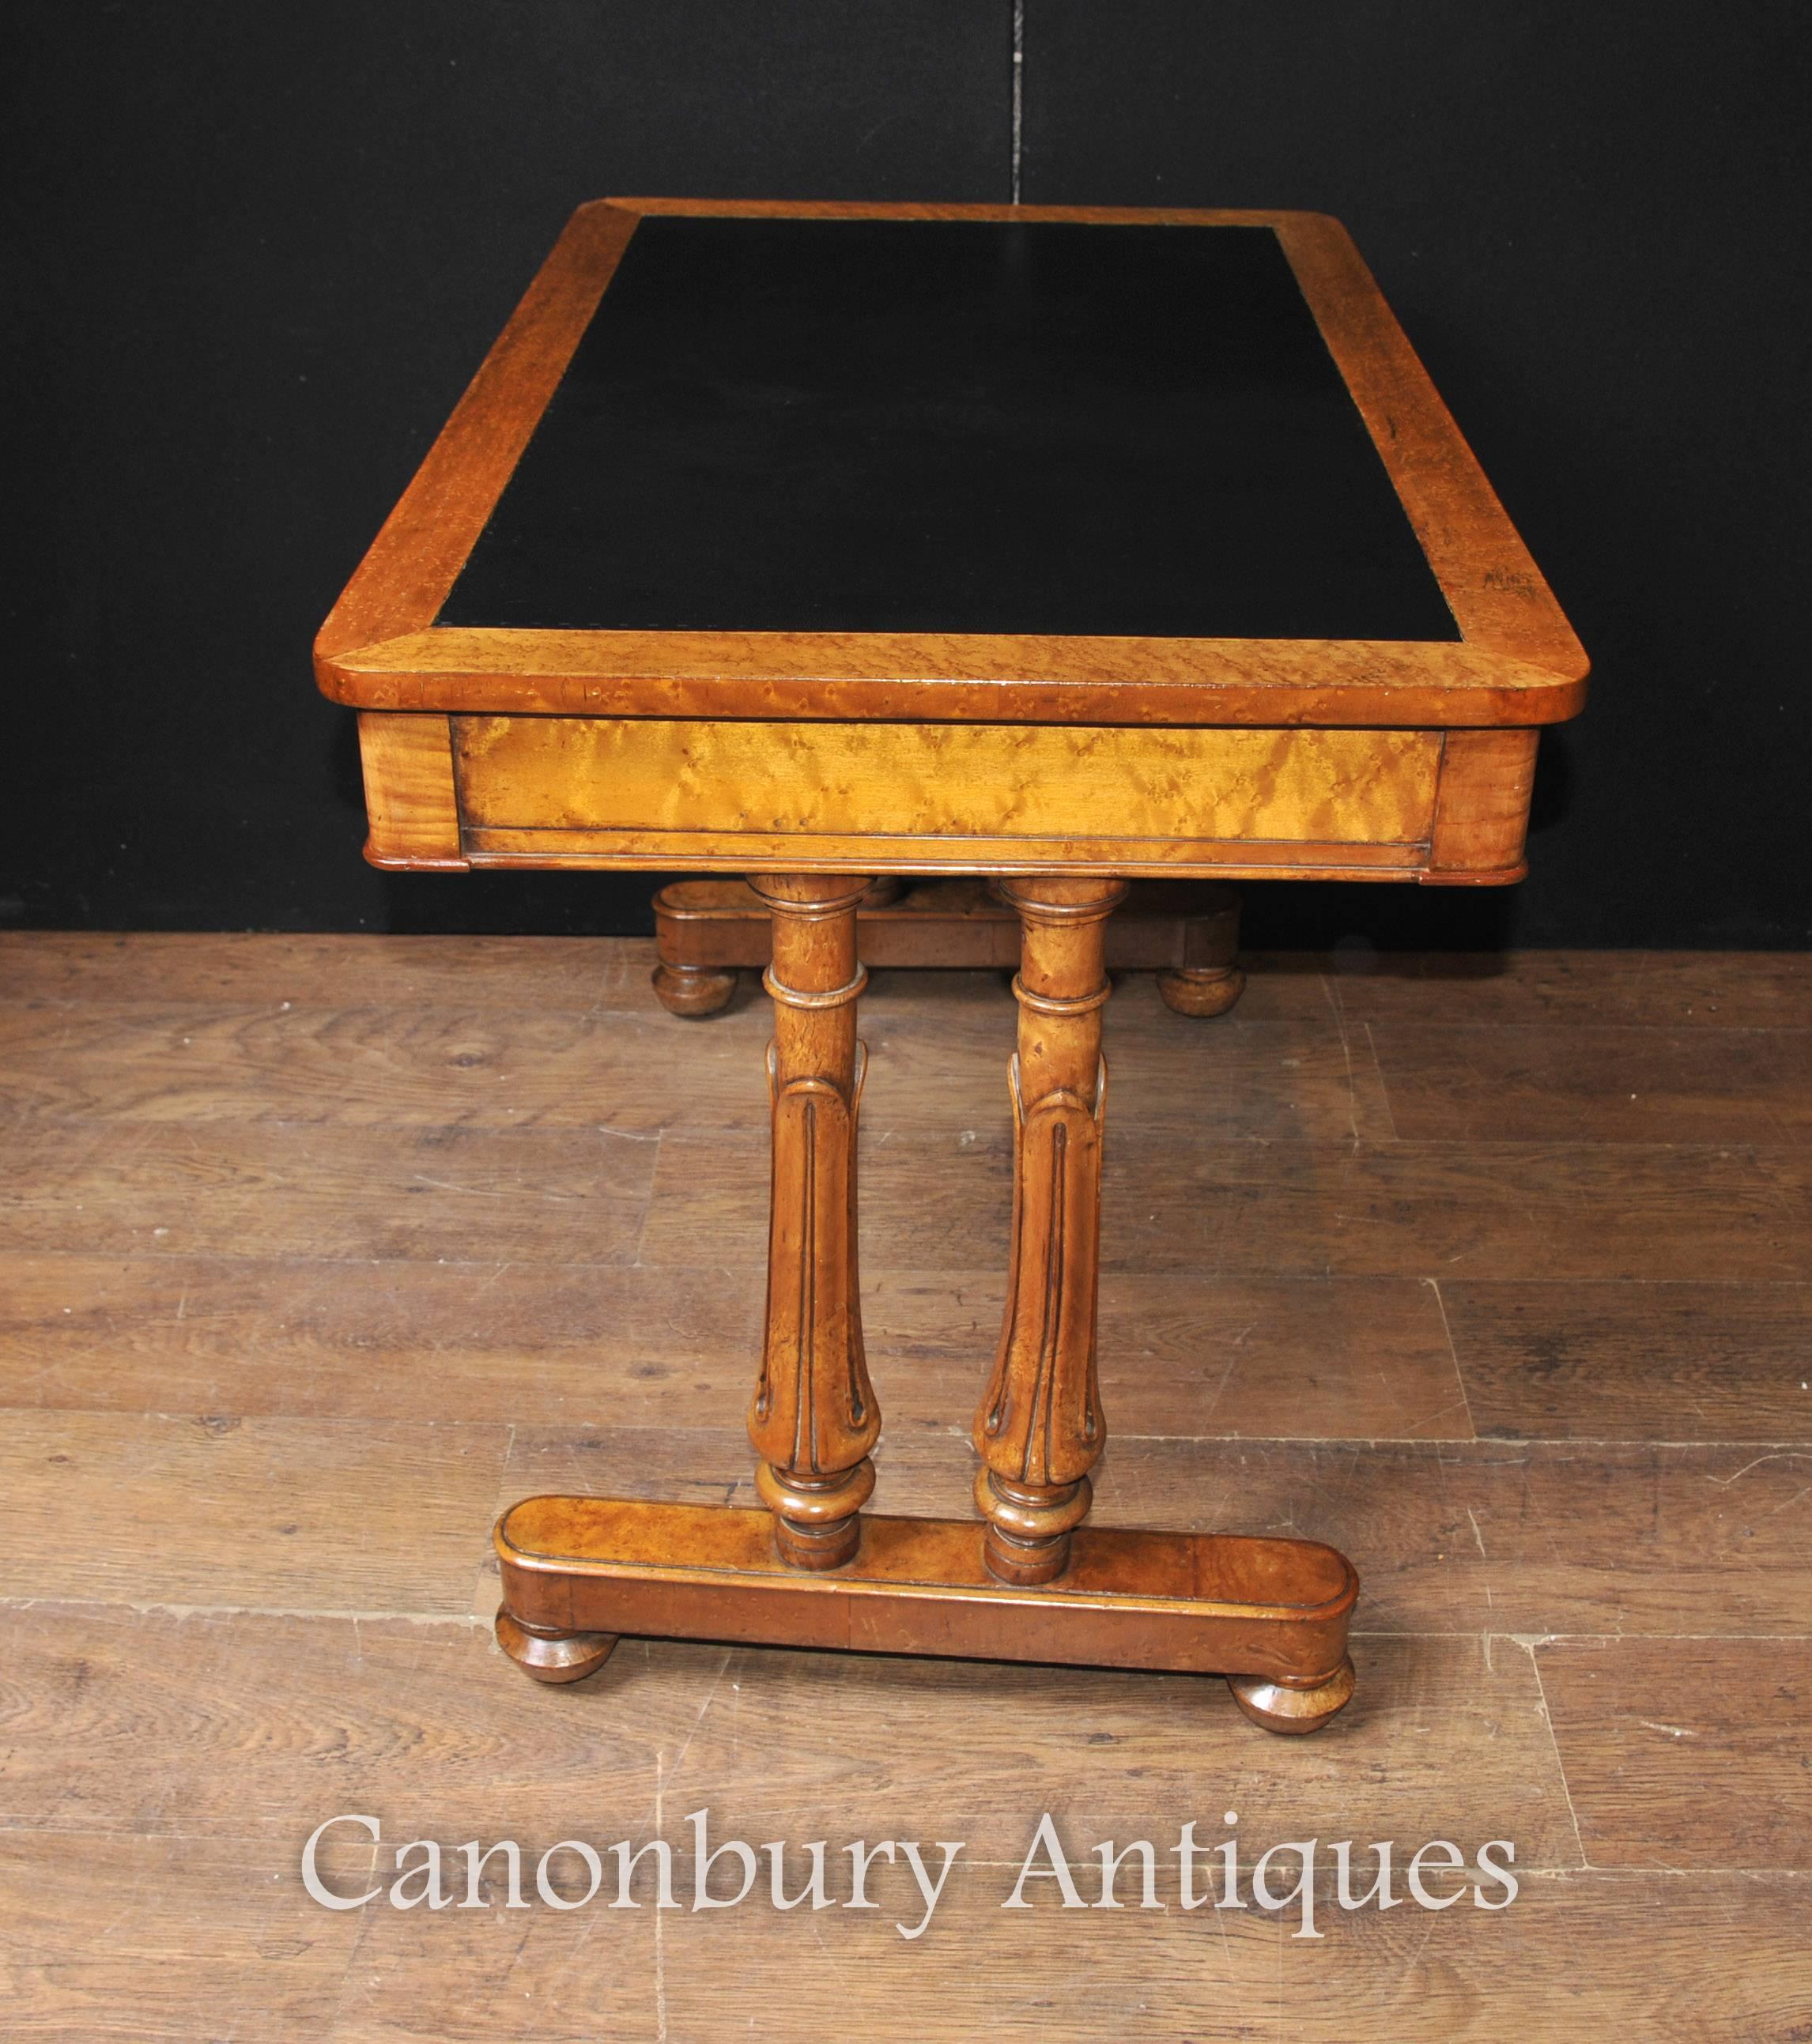 Antique Maple Wood Regency Writing Table Desk, circa 1830 Tulip Legs In Good Condition For Sale In Potters Bar, Herts